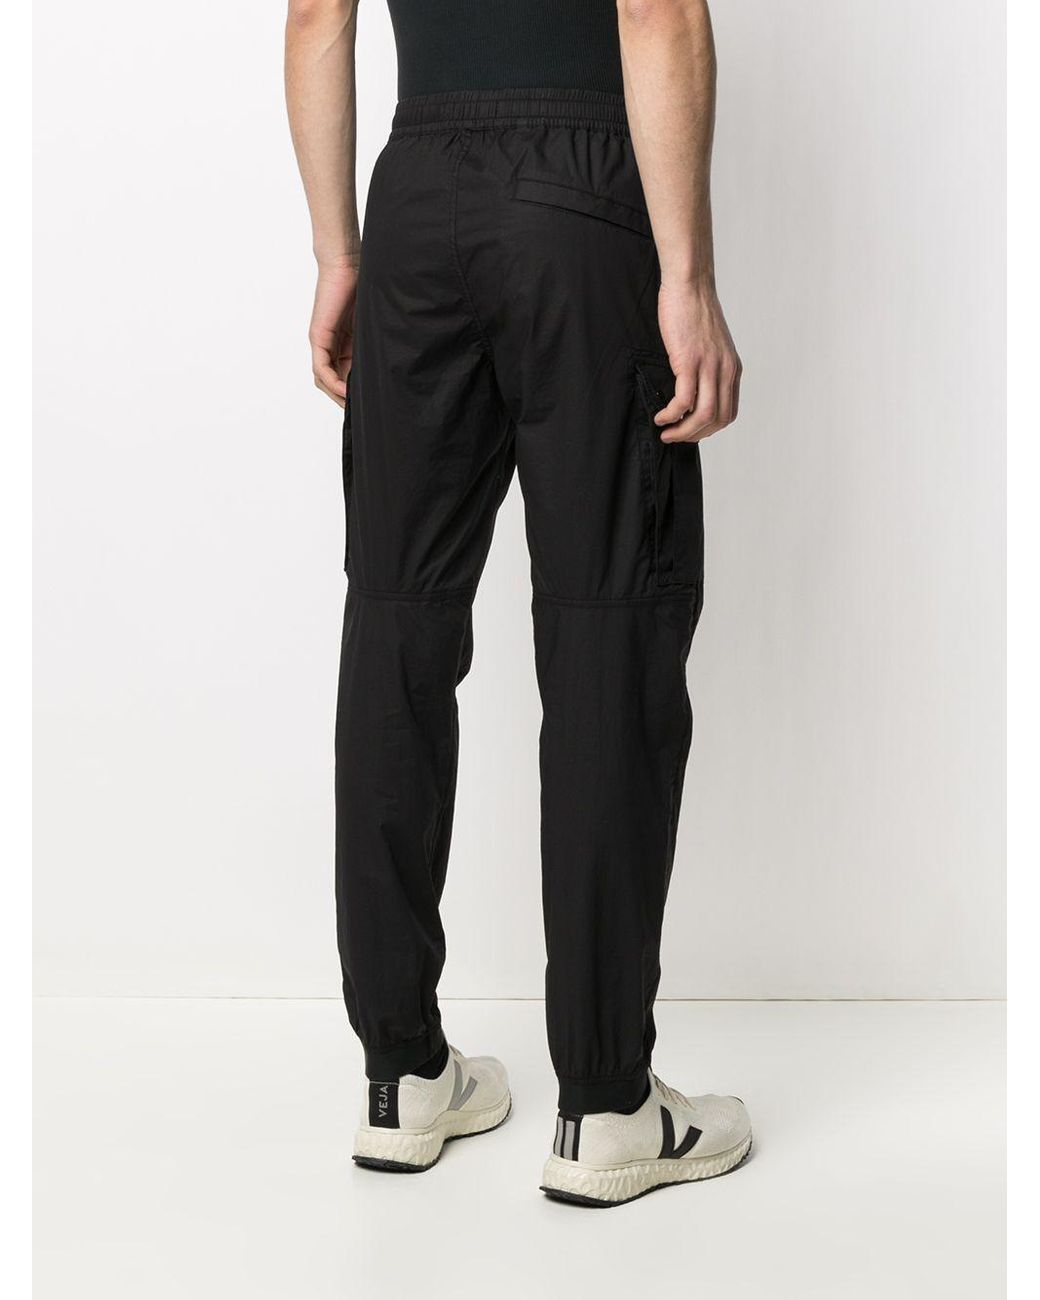 Stone Island Synthetic Logo Patch Cargo Trousers in Black for Men - Lyst